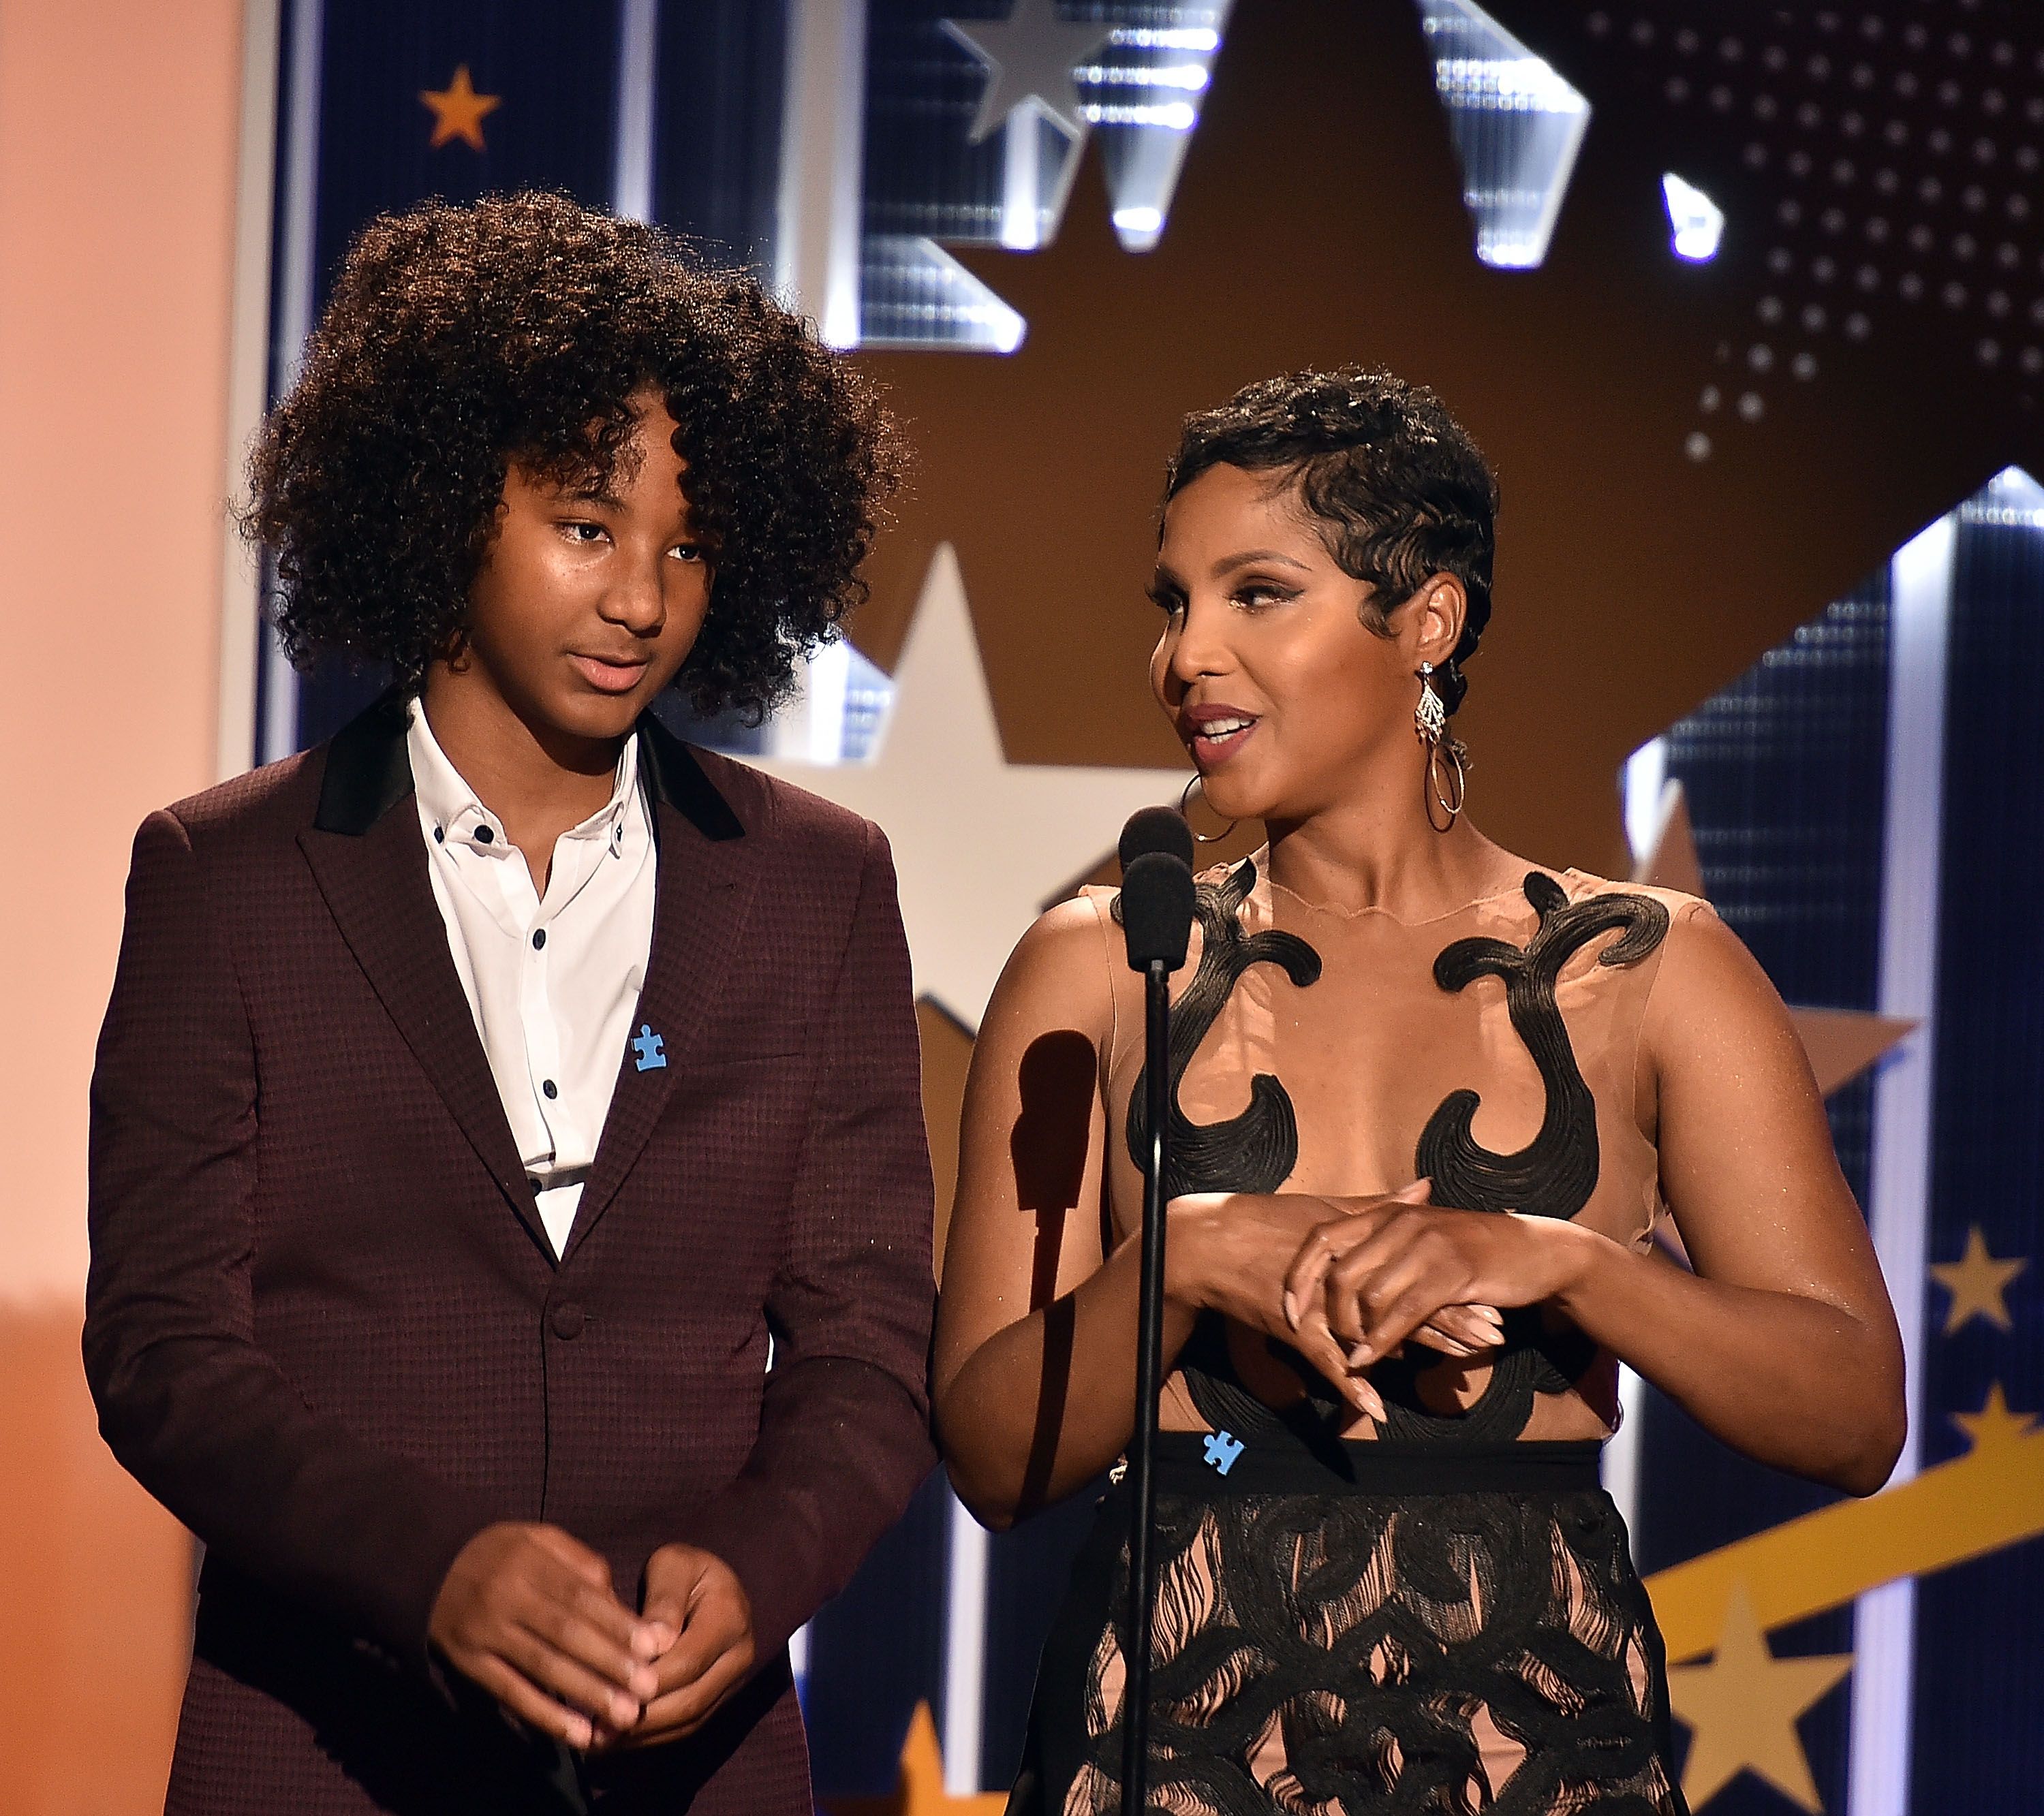 Toni Braxton and Diezel Ky Braxton-Lewis at UNCF's "An Evening of Stars" at Boisfeuillet Jones Atlanta Civic Center on April 12, 2015 in Atlanta, Georgia. | Source: Getty Images